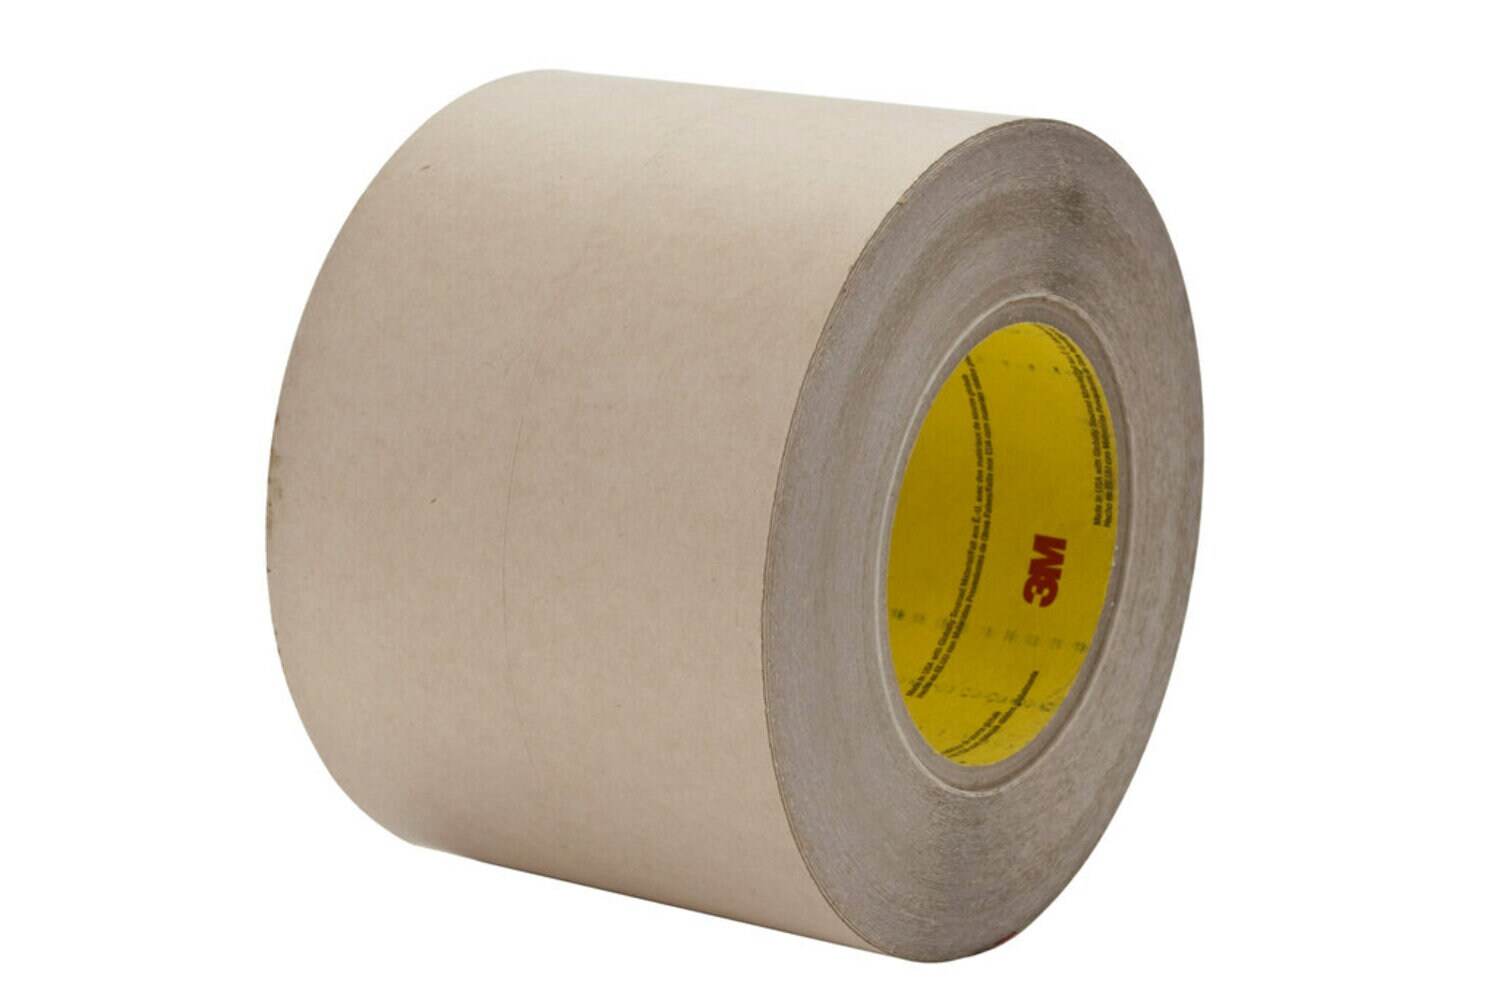 7100179428 - 3M Sealing Tape 8777 Tan, 1 in x 75 ft, 36 rolls per case, Solid Liner